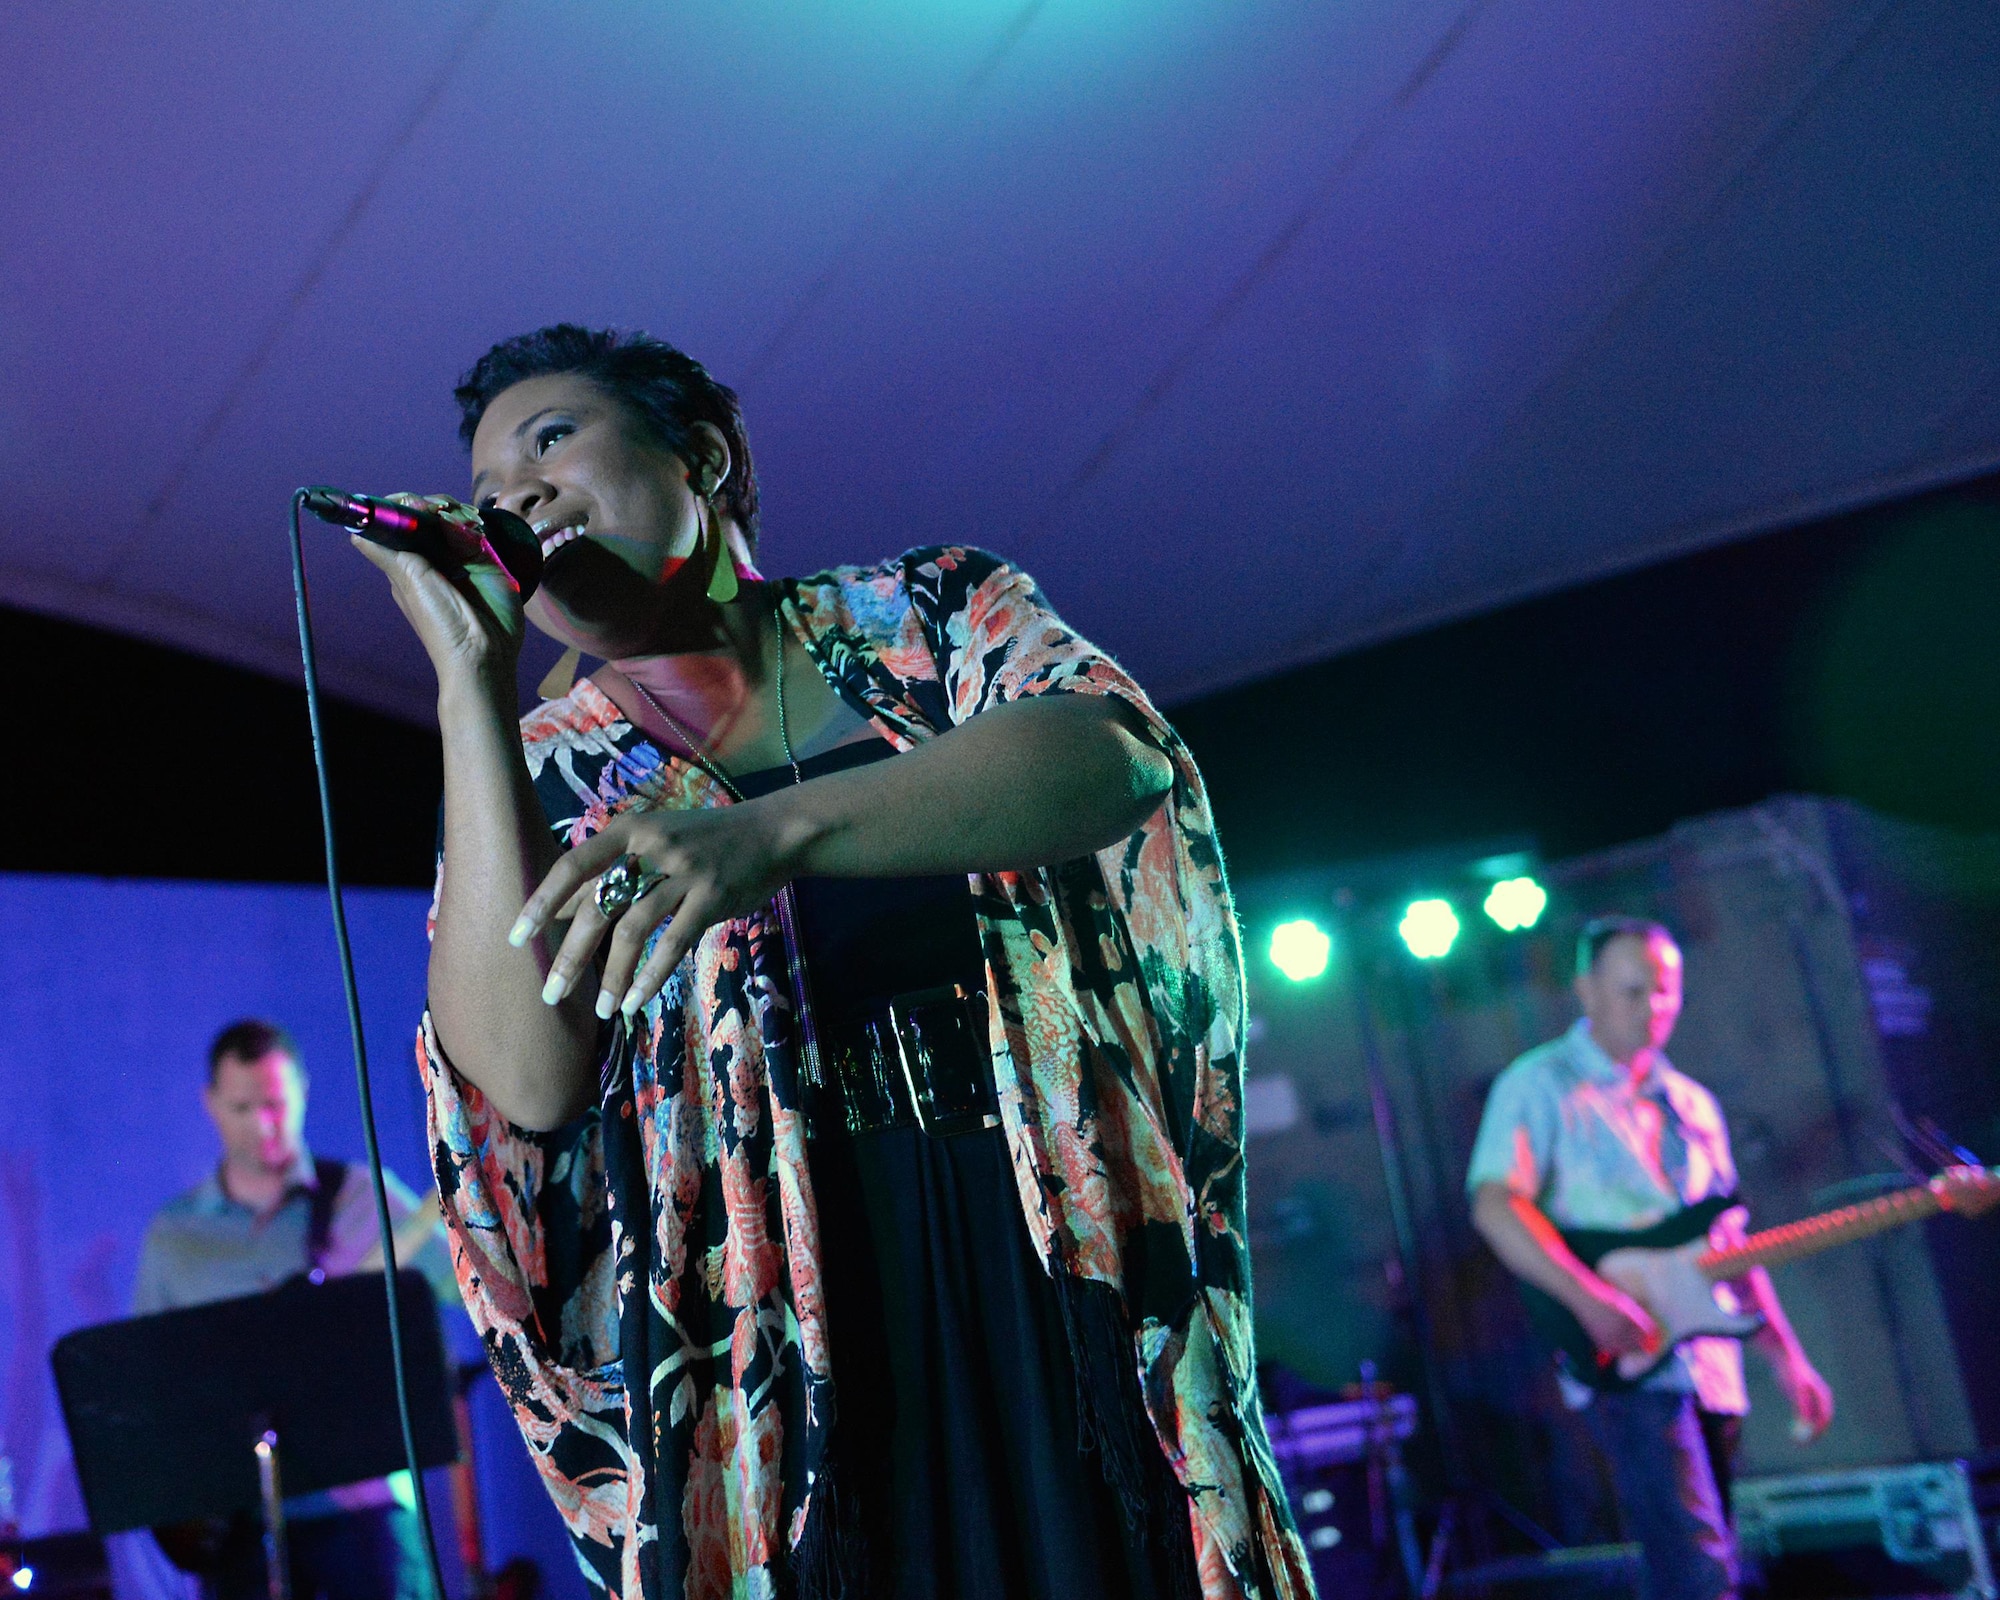 Melinda Doolittle, an accomplished vocalist and top finisher on American Idol, holds a concert with music and backup singing from members of the Air Forces Central Command Band at Al Udeid Air Base, Qatar, May 25, 2017. Doolittle performed for service members deployed overseas, accompanied by the Air Forces Central Command Band. (U.S. Air Force photo by Tech. Sgt. Bradly A. Schneider/Released)